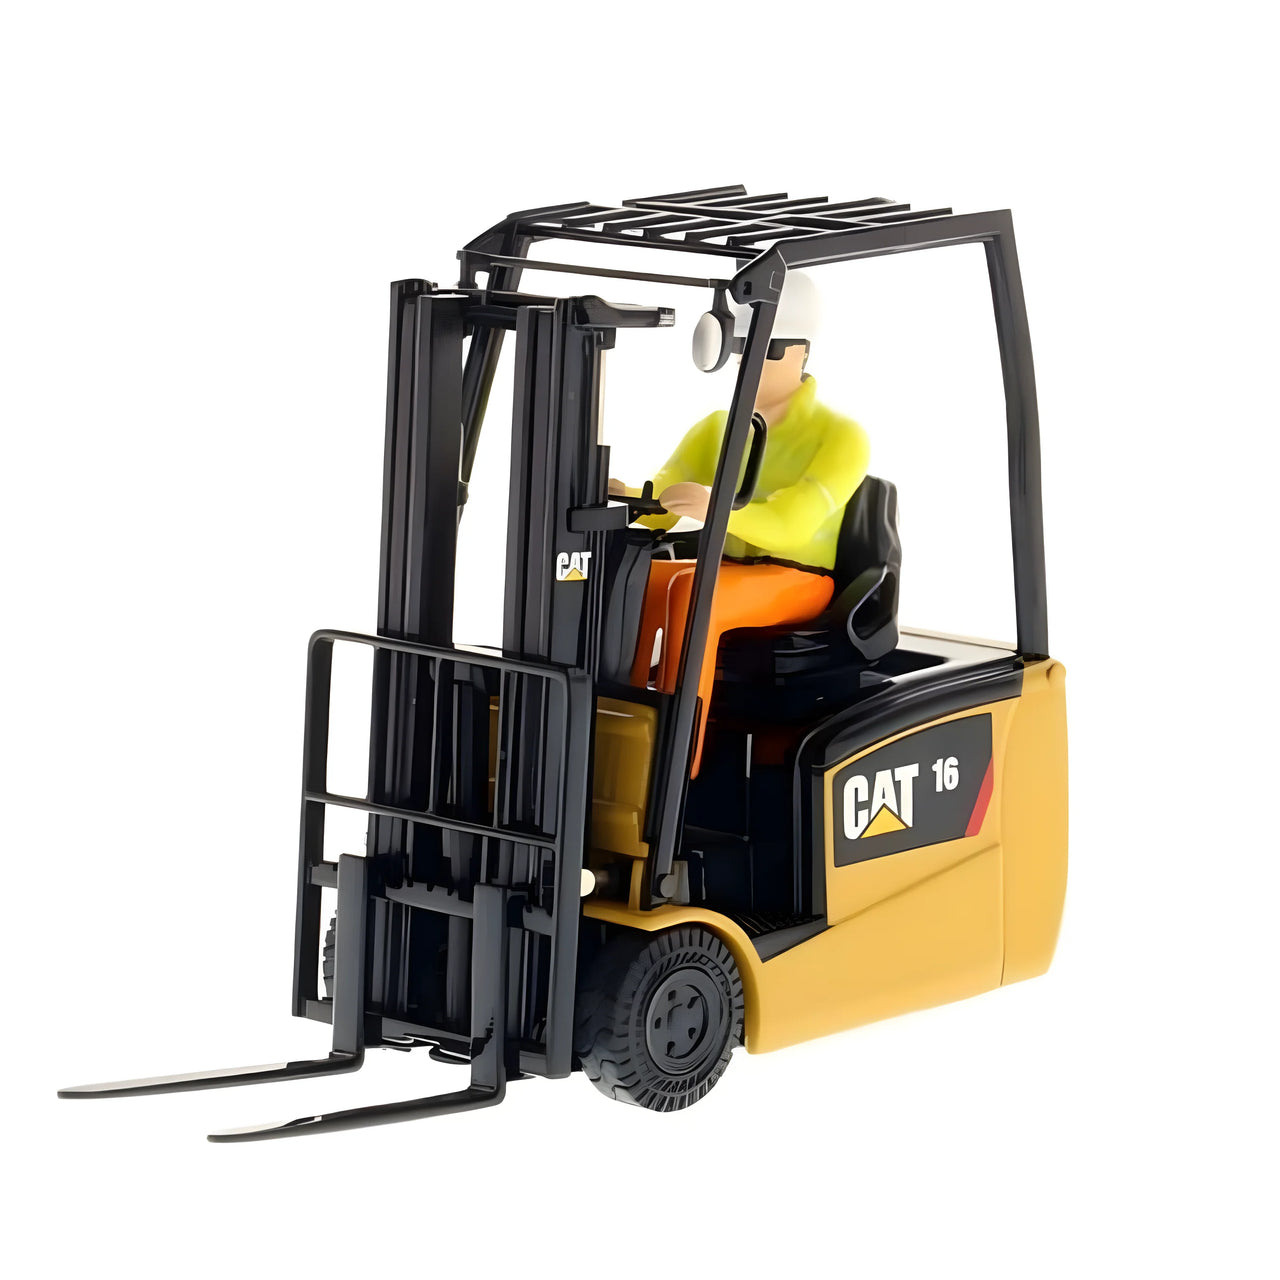 85504C Caterpillar EP16(C)PNY Forklift 1:25 Scale